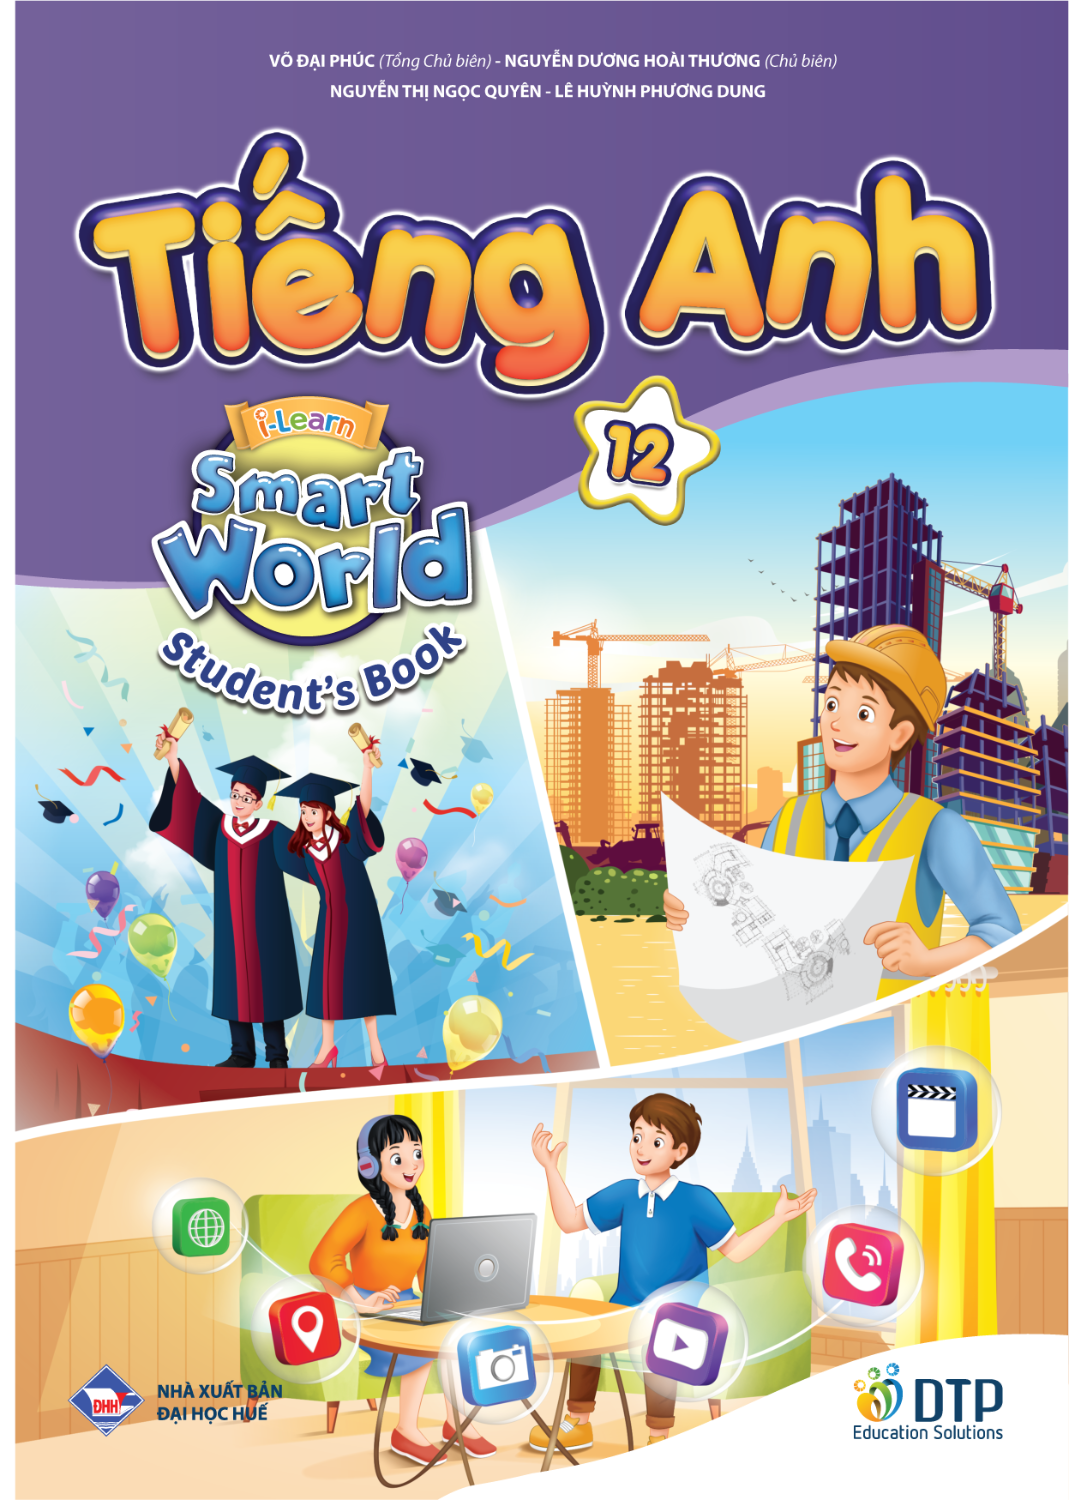 Tiếng Anh i-Learn Smart World (Cấp 3)